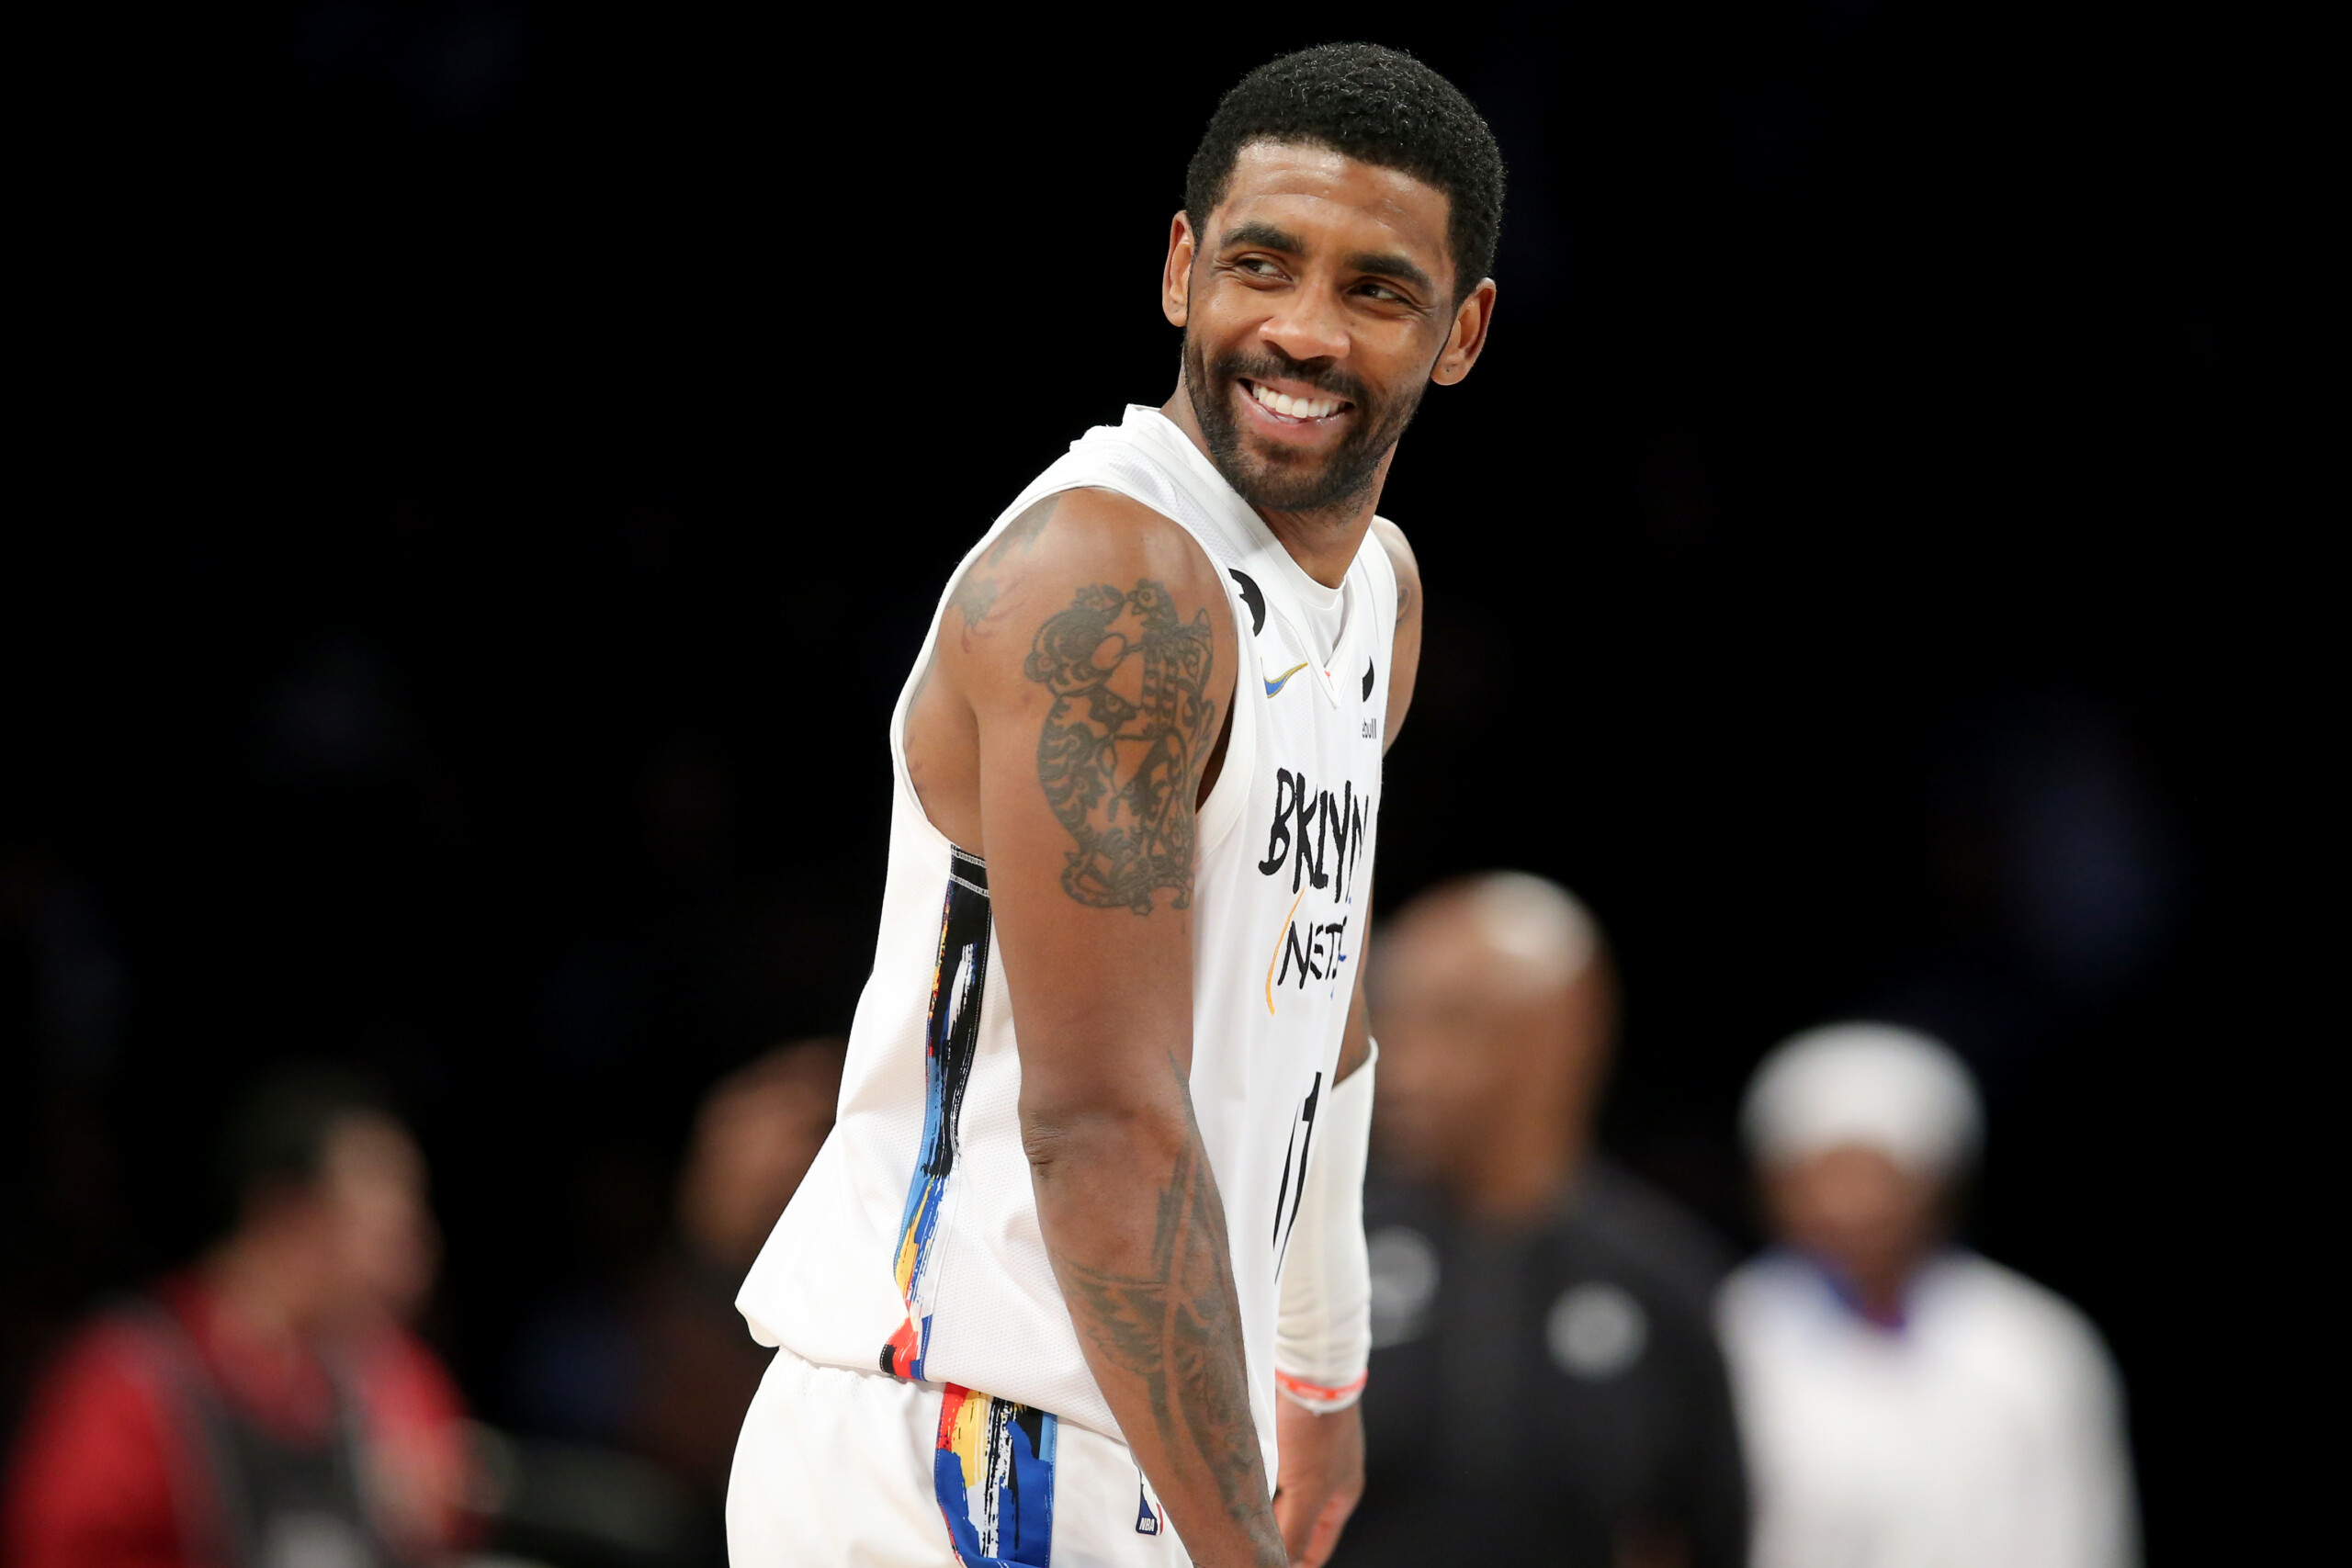 Kyrie Irving wanted to lead a team in the NBA playoffs. He led